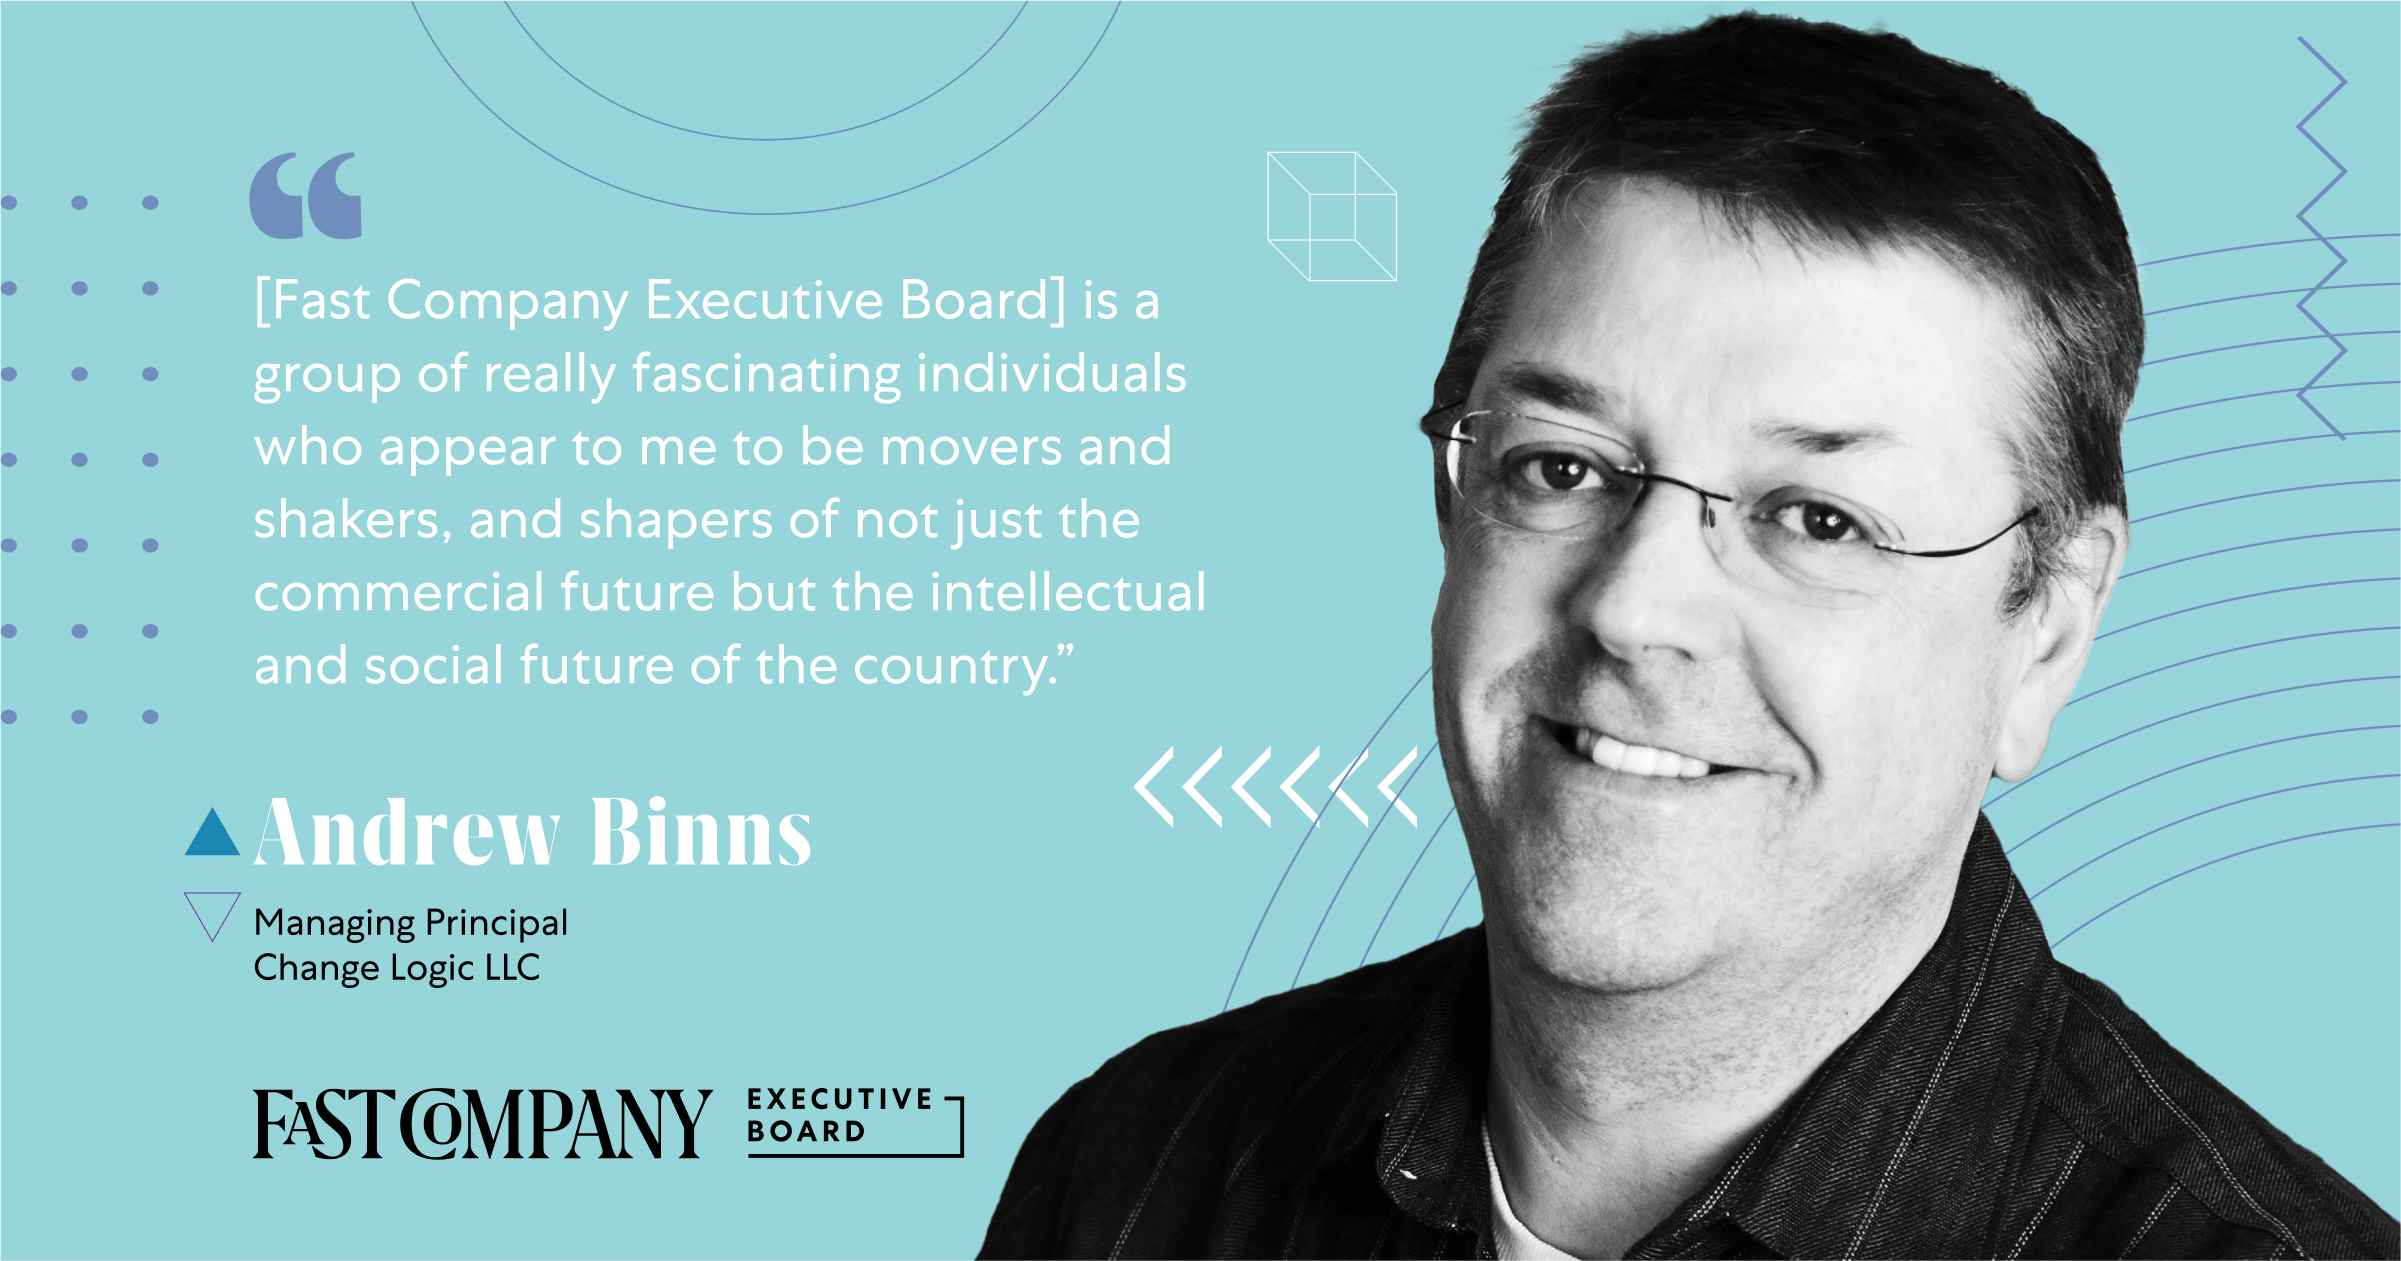 For Andrew Binns, Fast Company Executive Board is a Valuable Community of Movers and Shakers